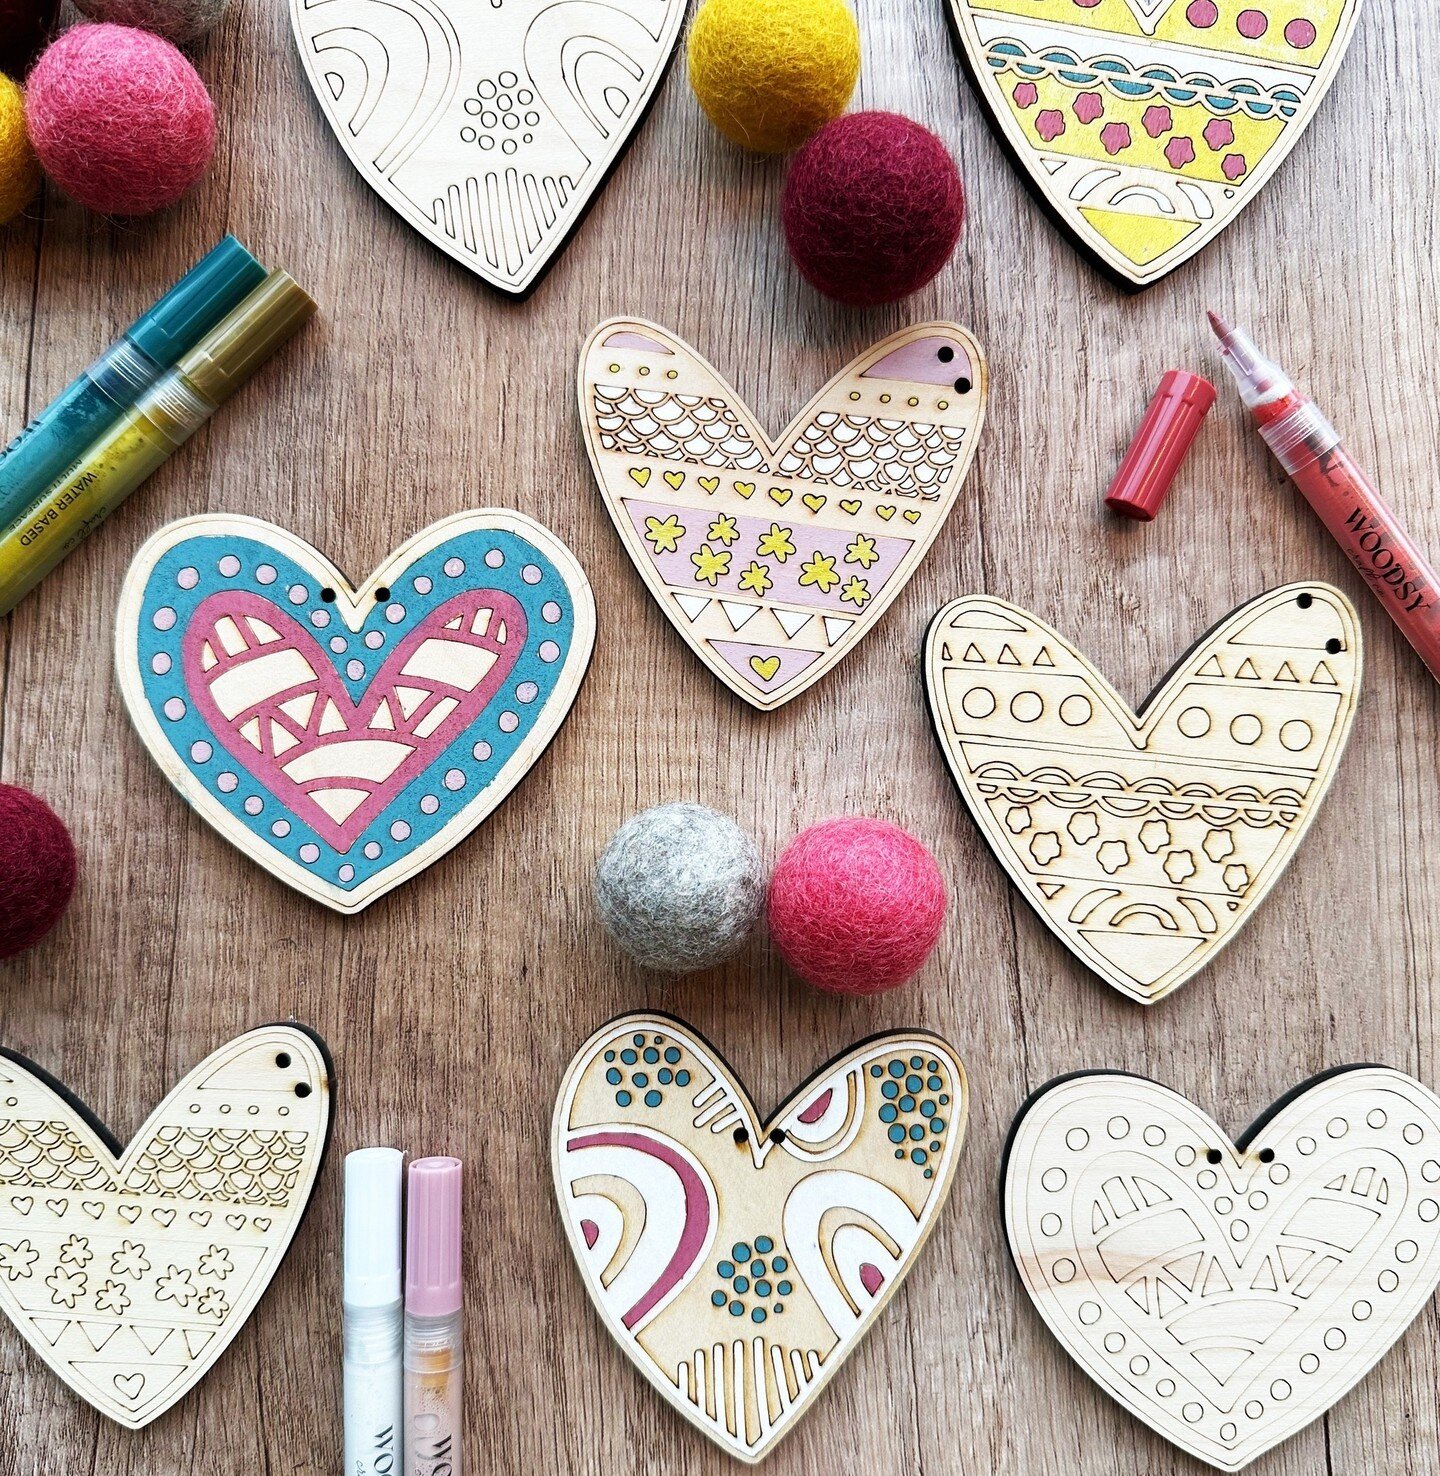 ✨ Exciting News Alert! ✨Woodsy Craft Co. has been featured on Redfin as the perfect Valentine's Day activity to spruce up your home decor! 💖 Whether you're flying solo or celebrating with a special someone, dive into our DIY craft kits to add a touc